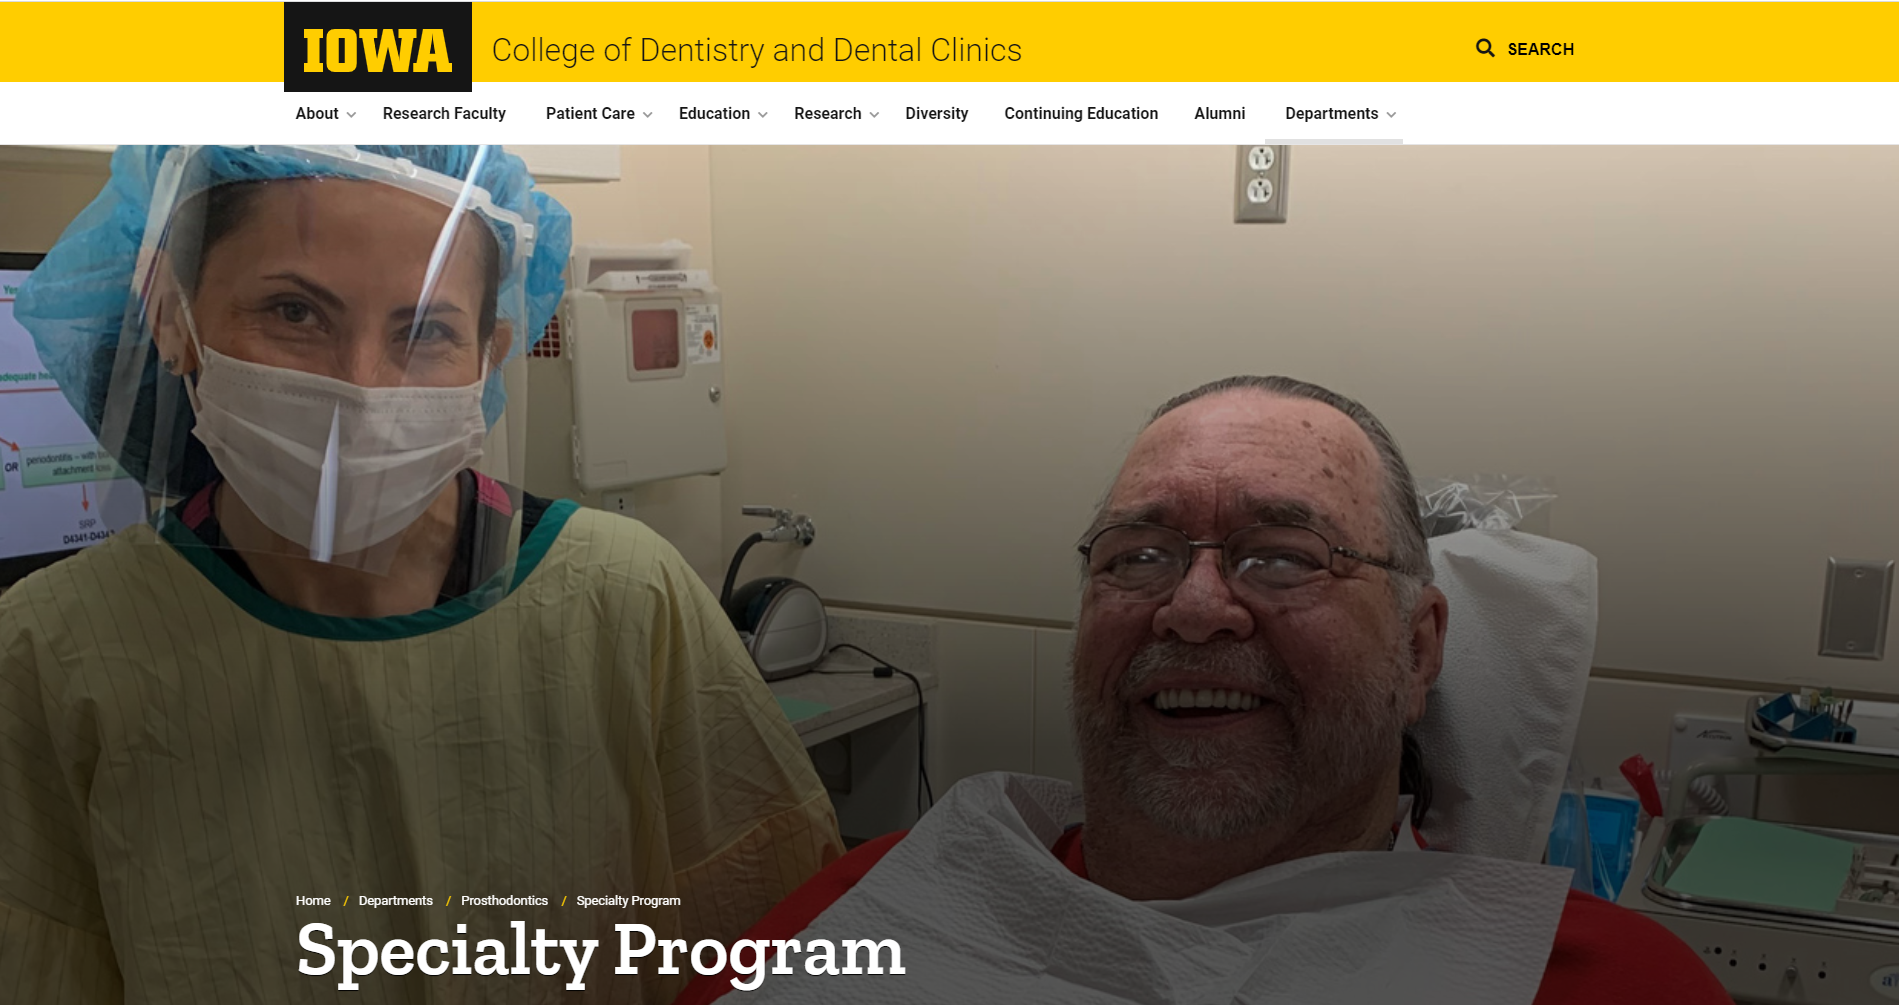 Dental Clinics  College of Dentistry and Dental Clinics - The University  of Iowa